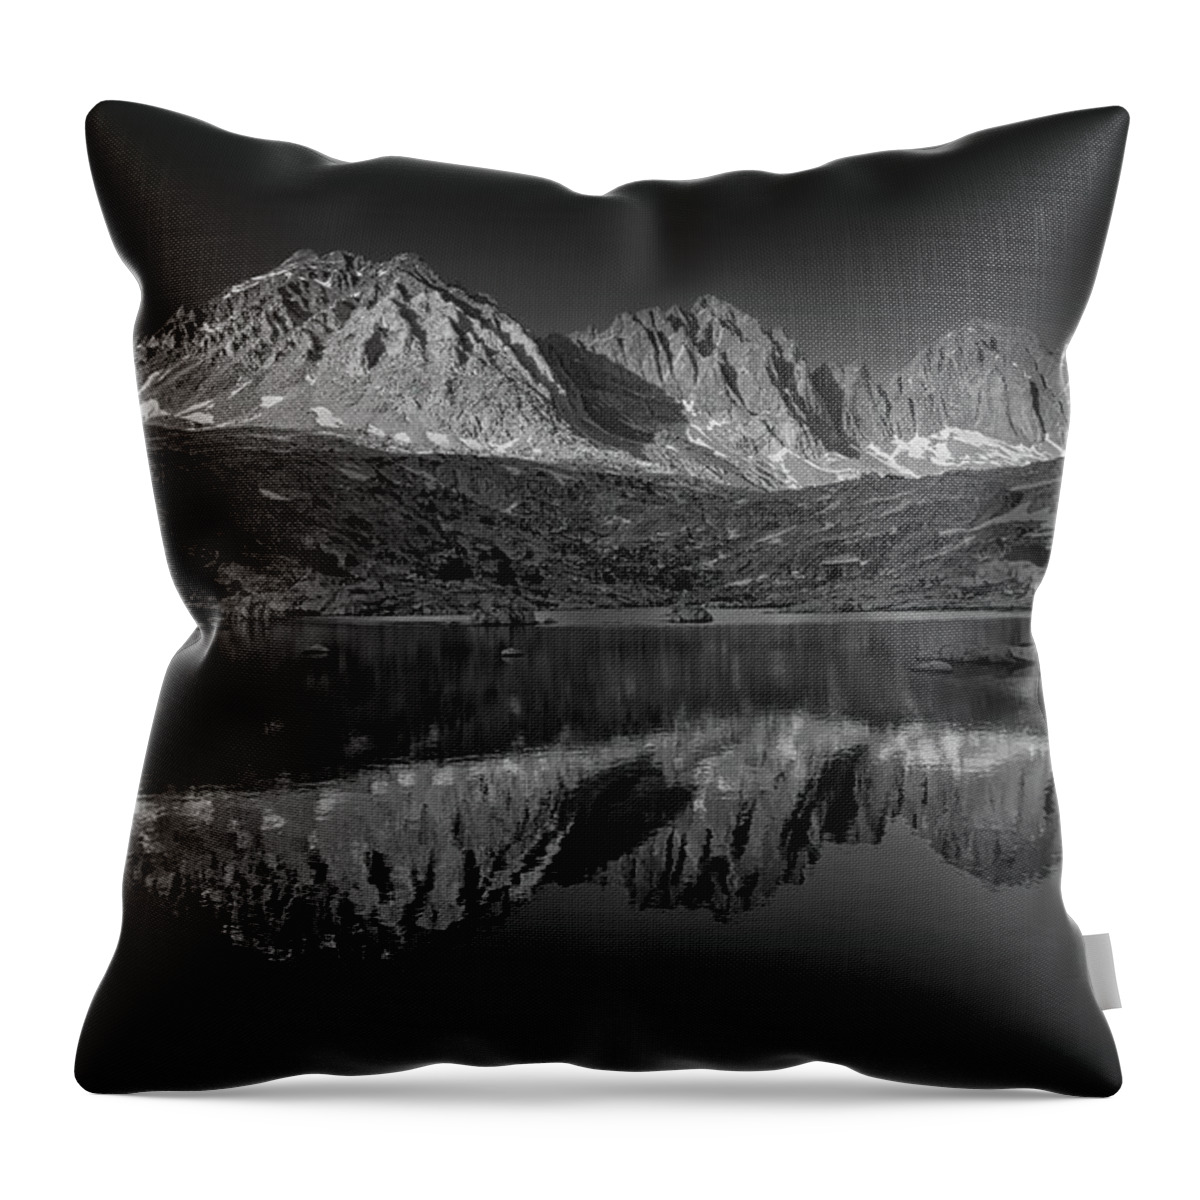 Dusy Basin Throw Pillow featuring the photograph Tertium Quid by Romeo Victor